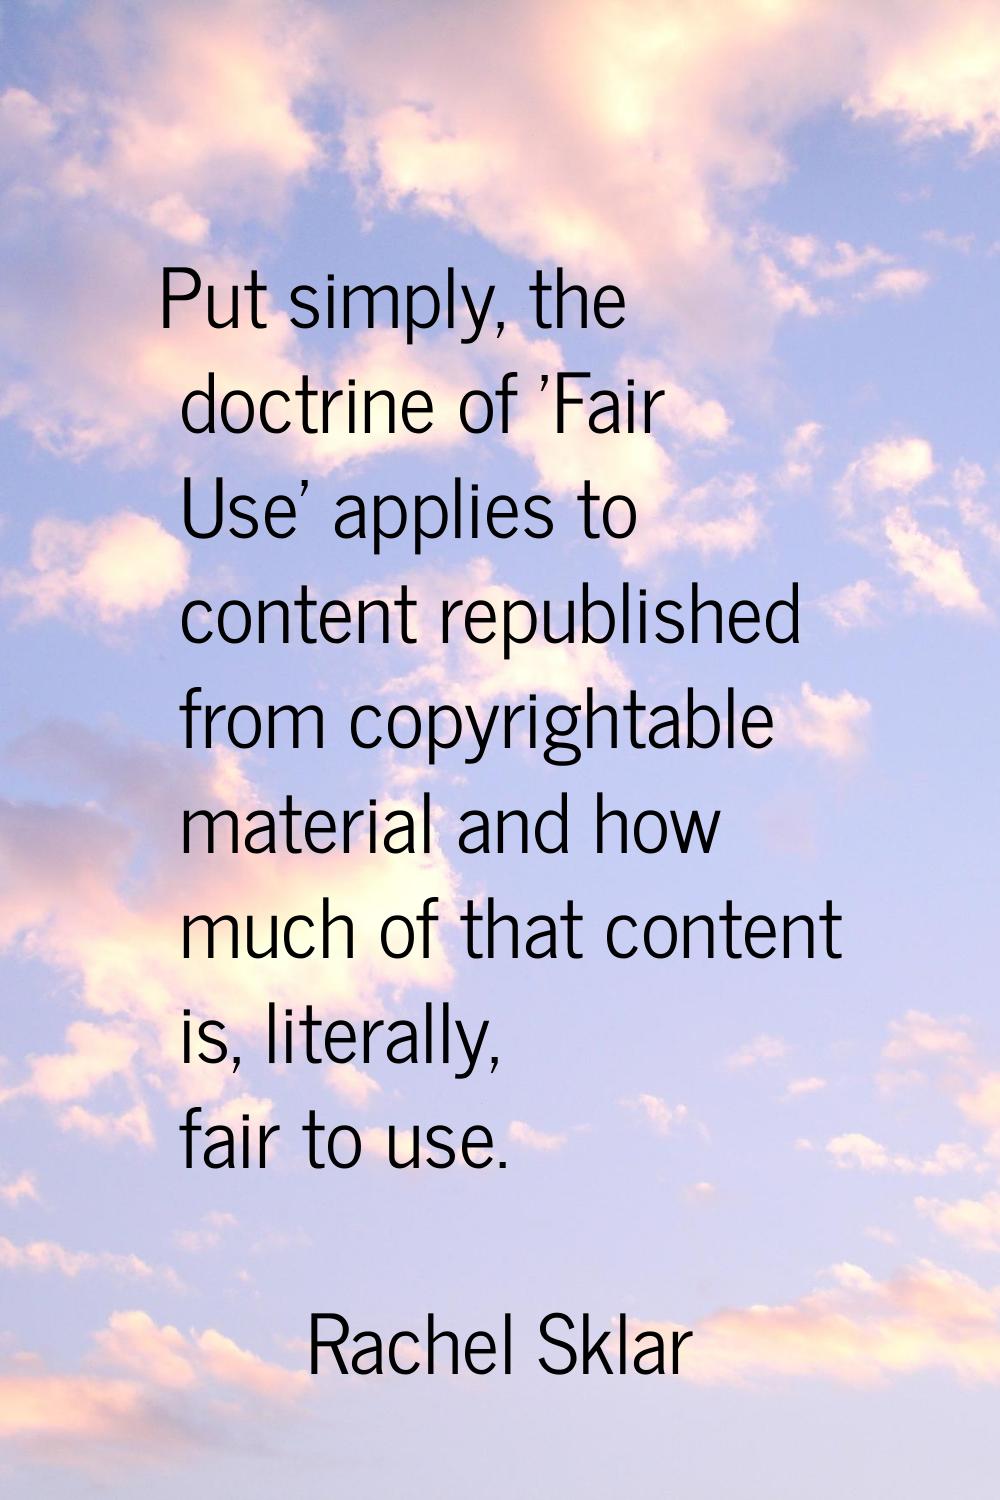 Put simply, the doctrine of 'Fair Use' applies to content republished from copyrightable material a